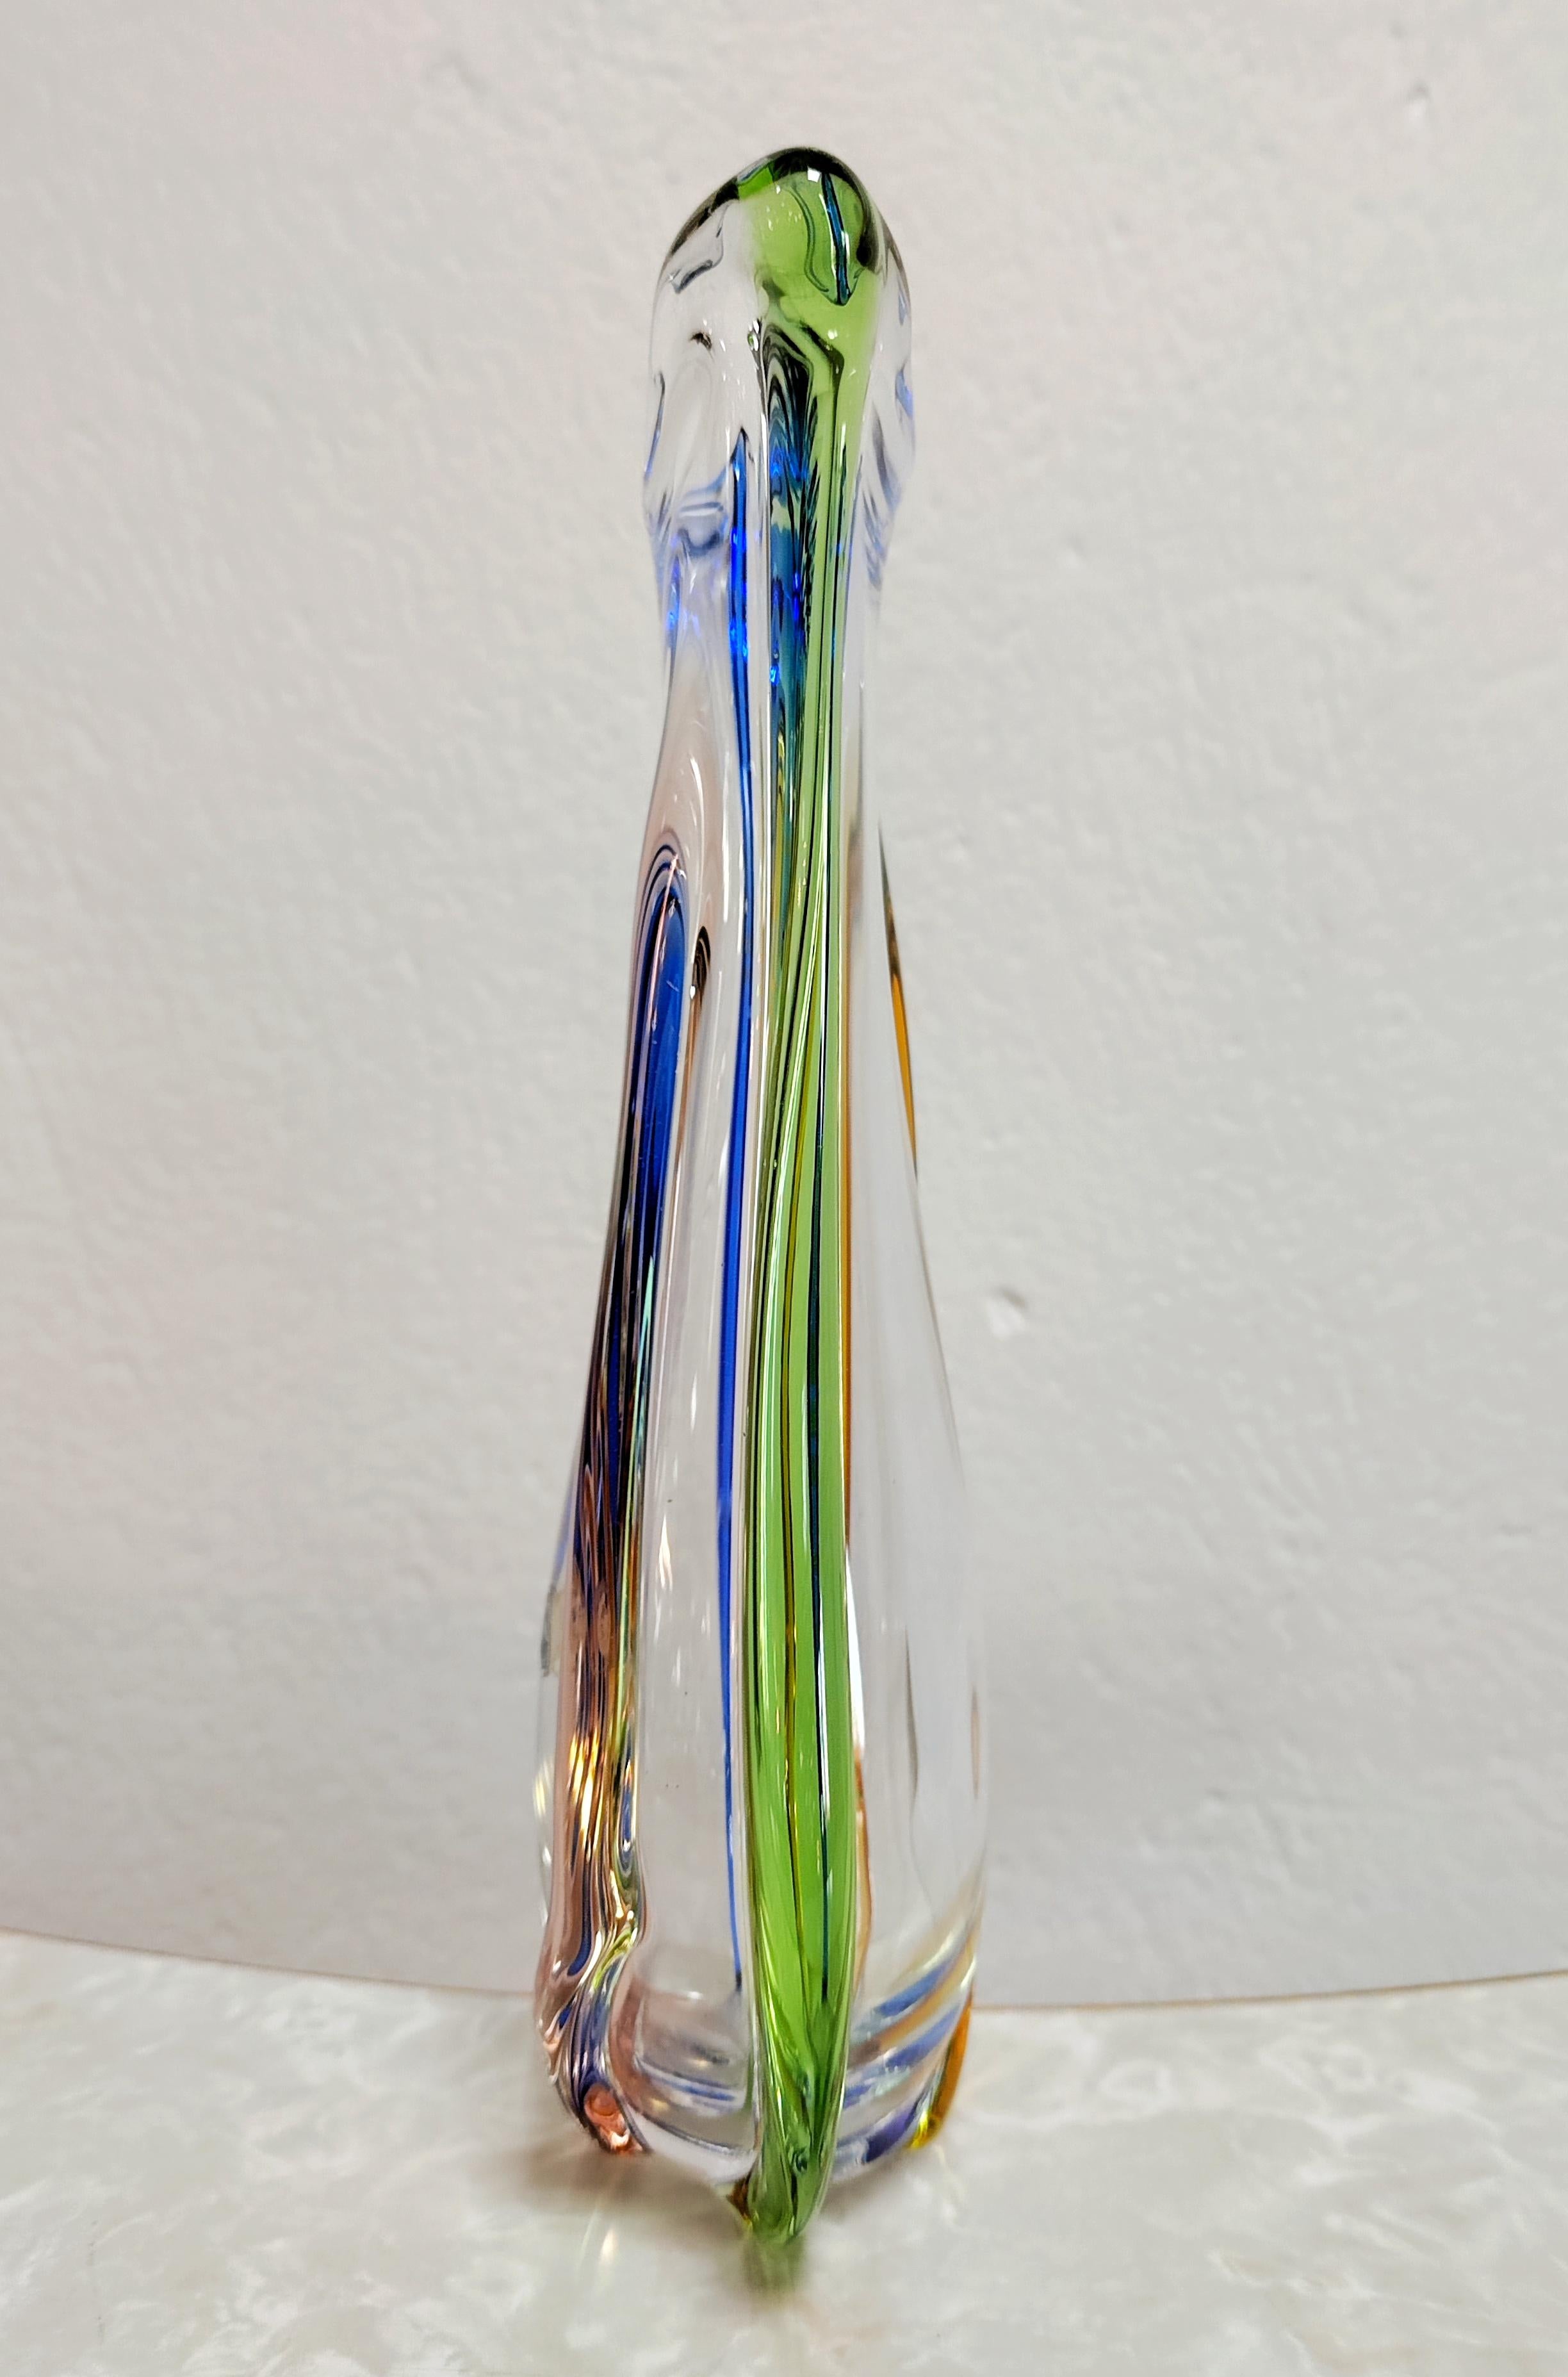 In this listing you will find a rare Mid-Century Modern vase by Frantisek Zemek for SKLO Glass Factory. It features for colorful glass treads going vertically through the vase from top to bottom, in different colors and a very elegant shape, making